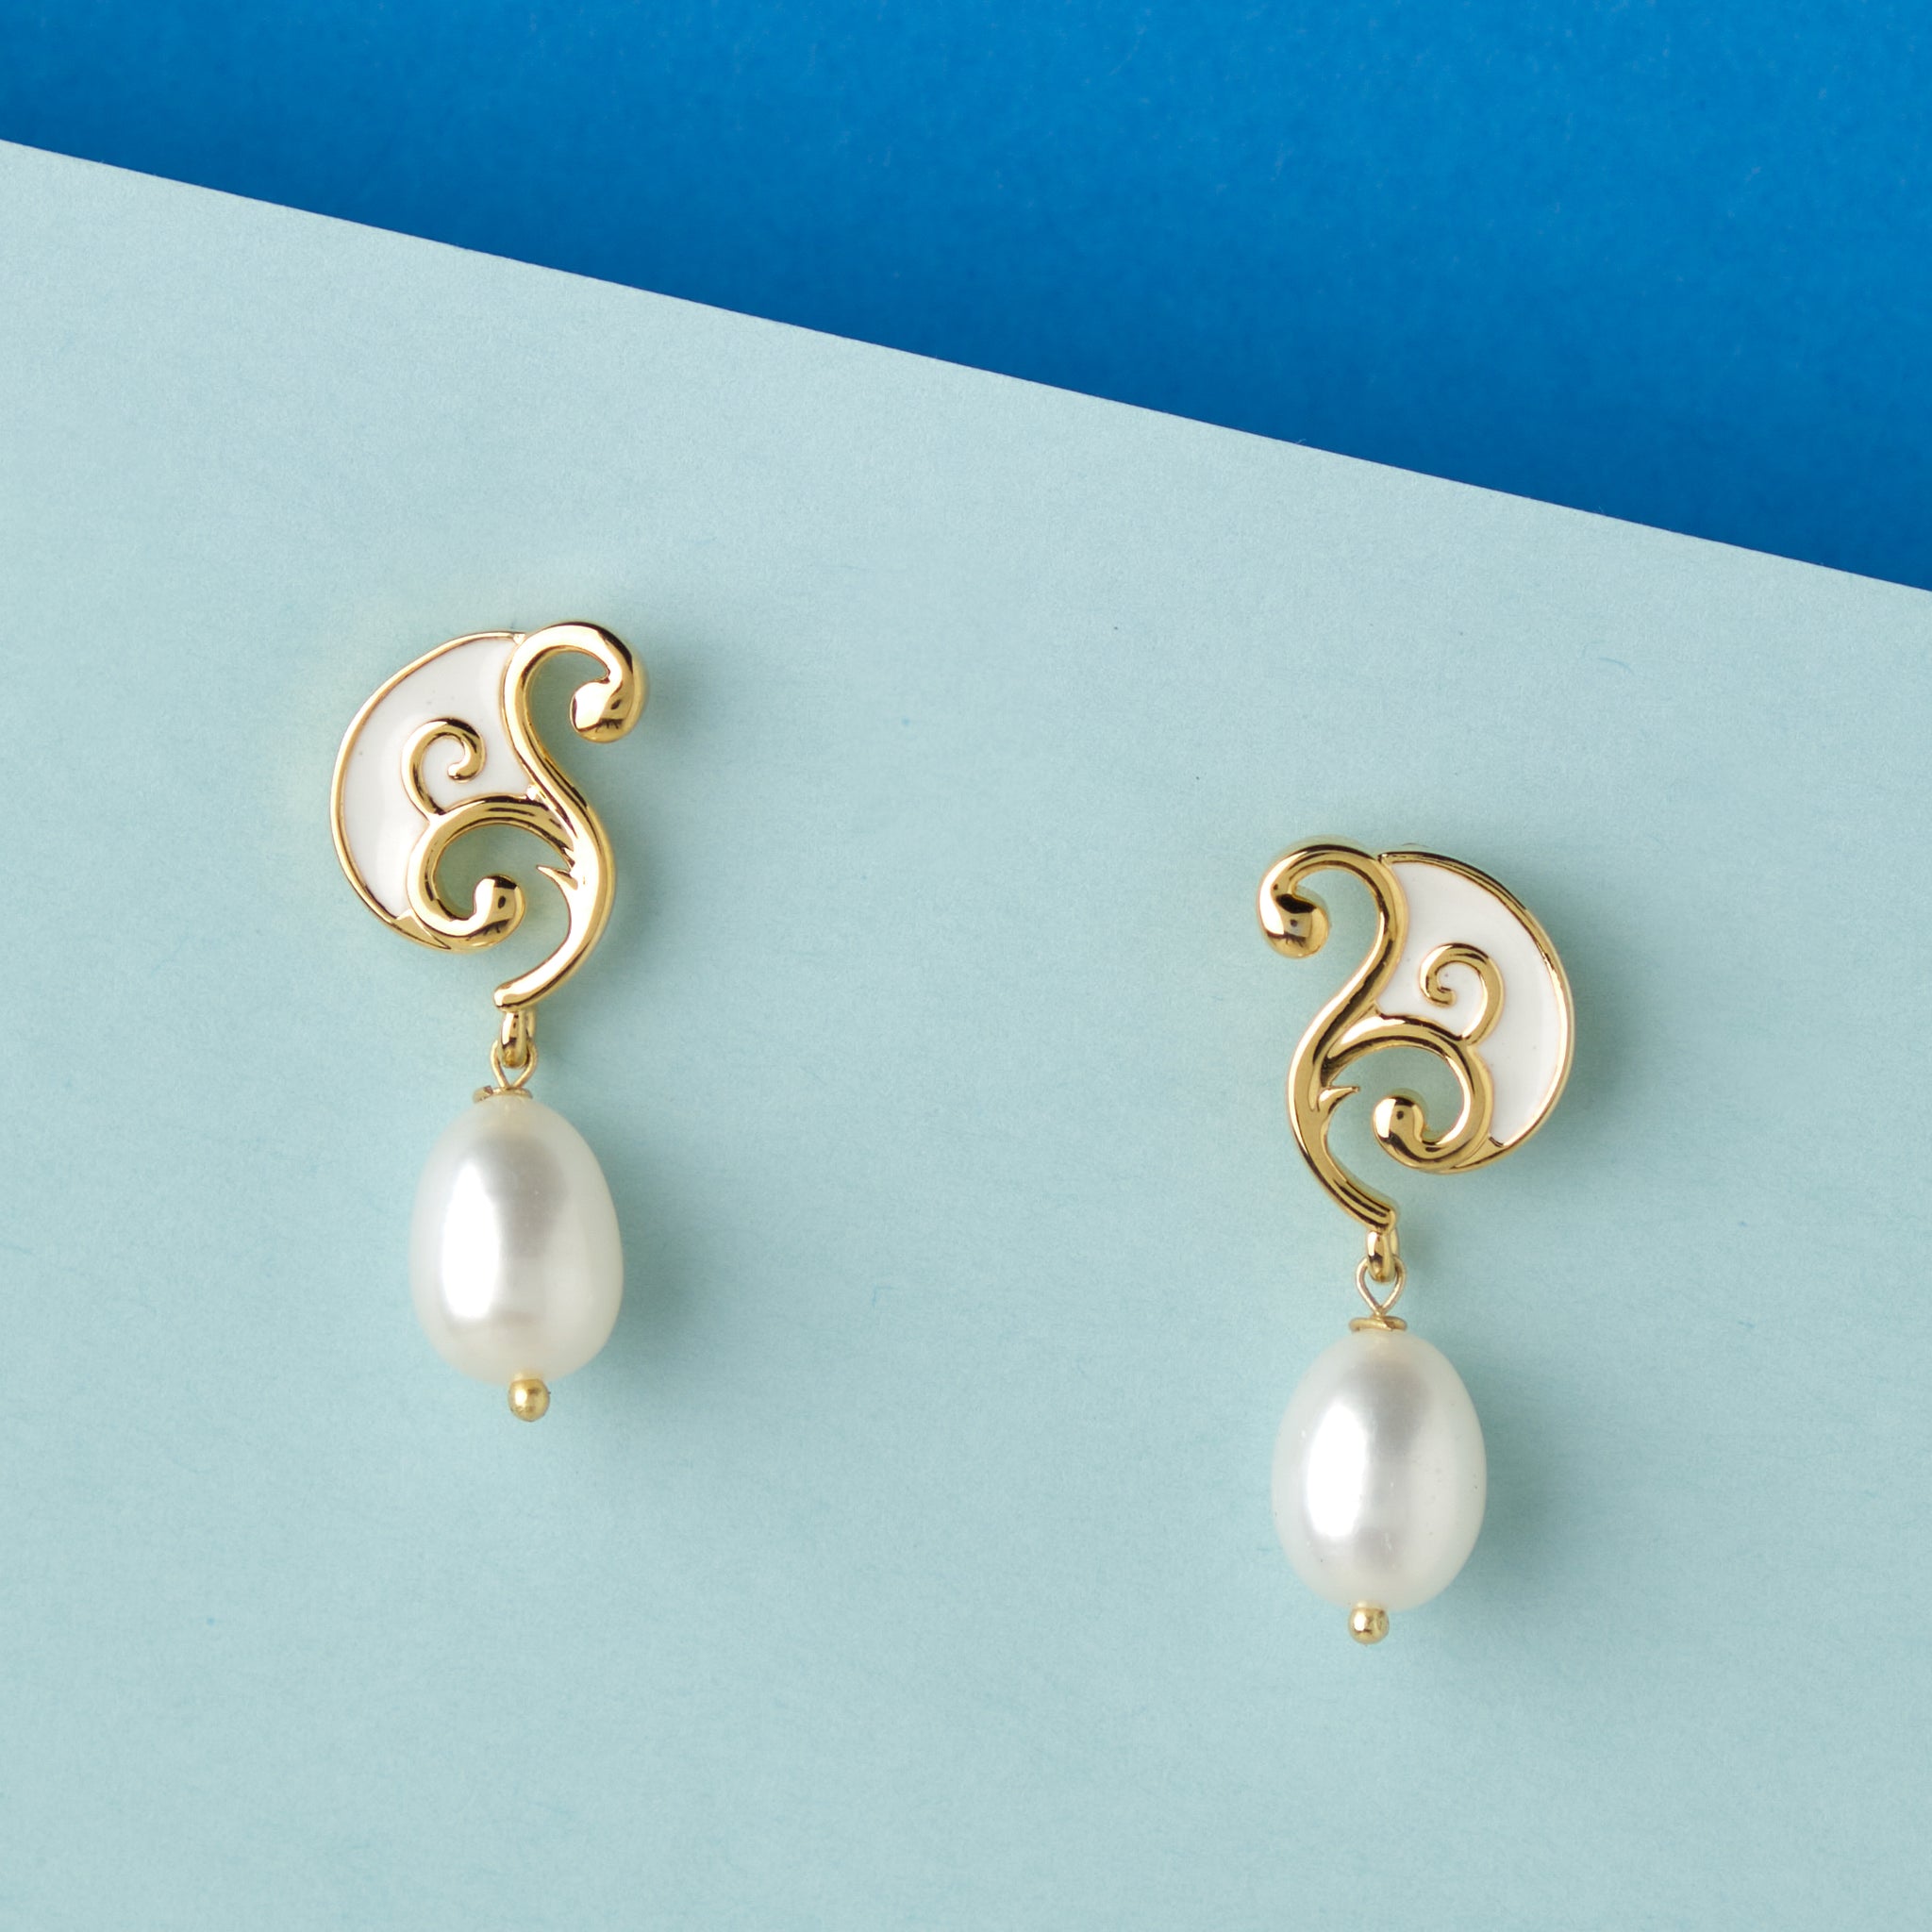 A pair of Chandrani Pearls Sophisticated Dainty Pearl Drop Earrings on a blue background.